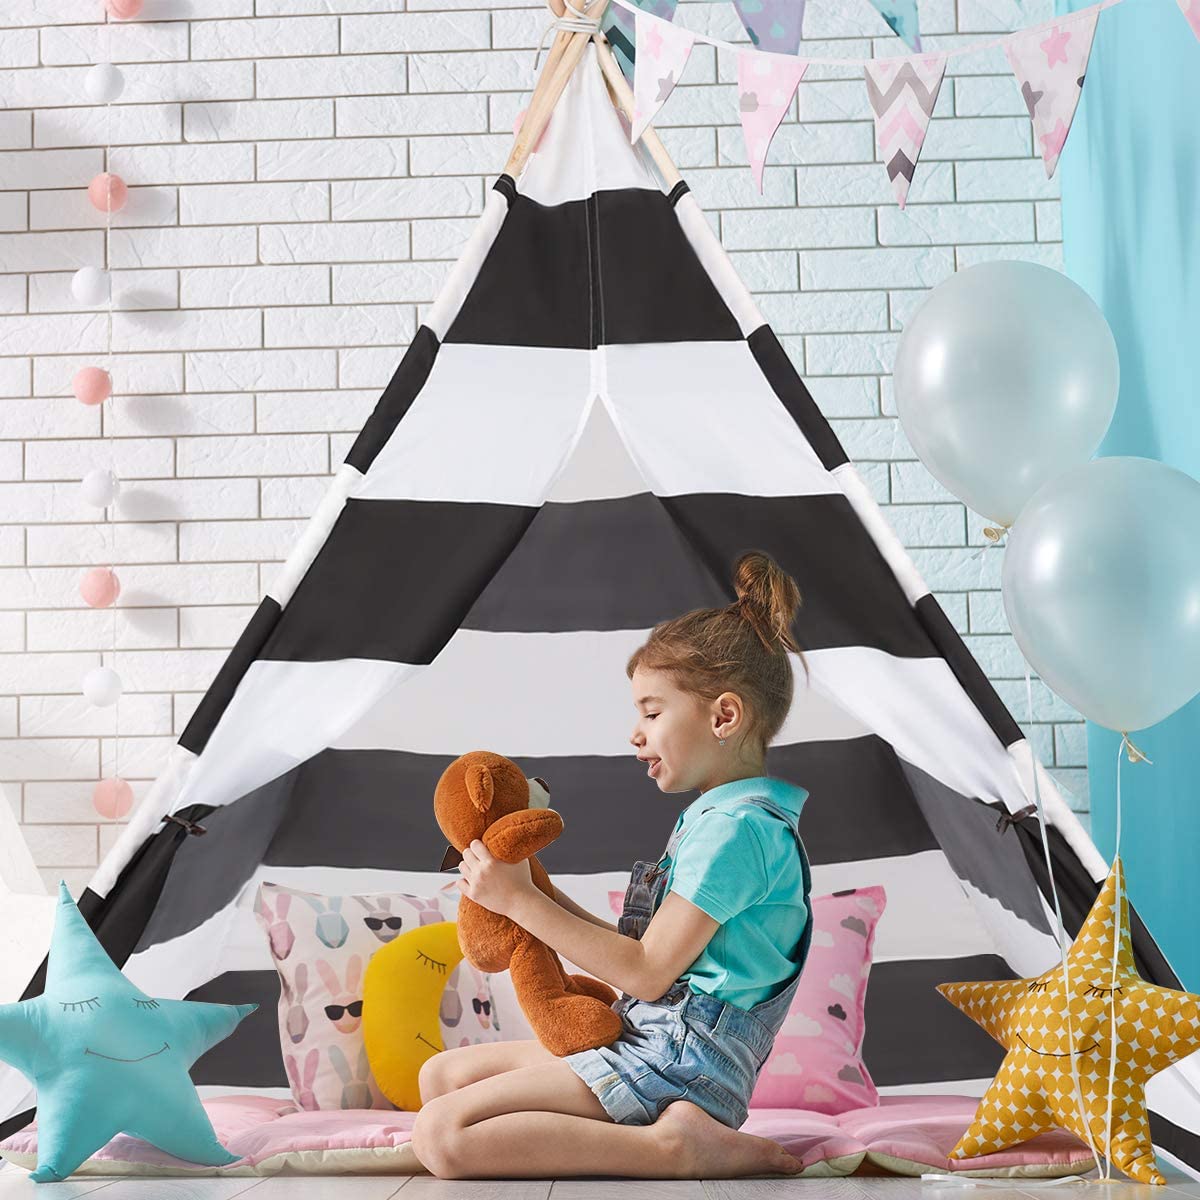 Costway Play Tent Teepee Play Tent Play House Childrens Tent Tipi Tent For